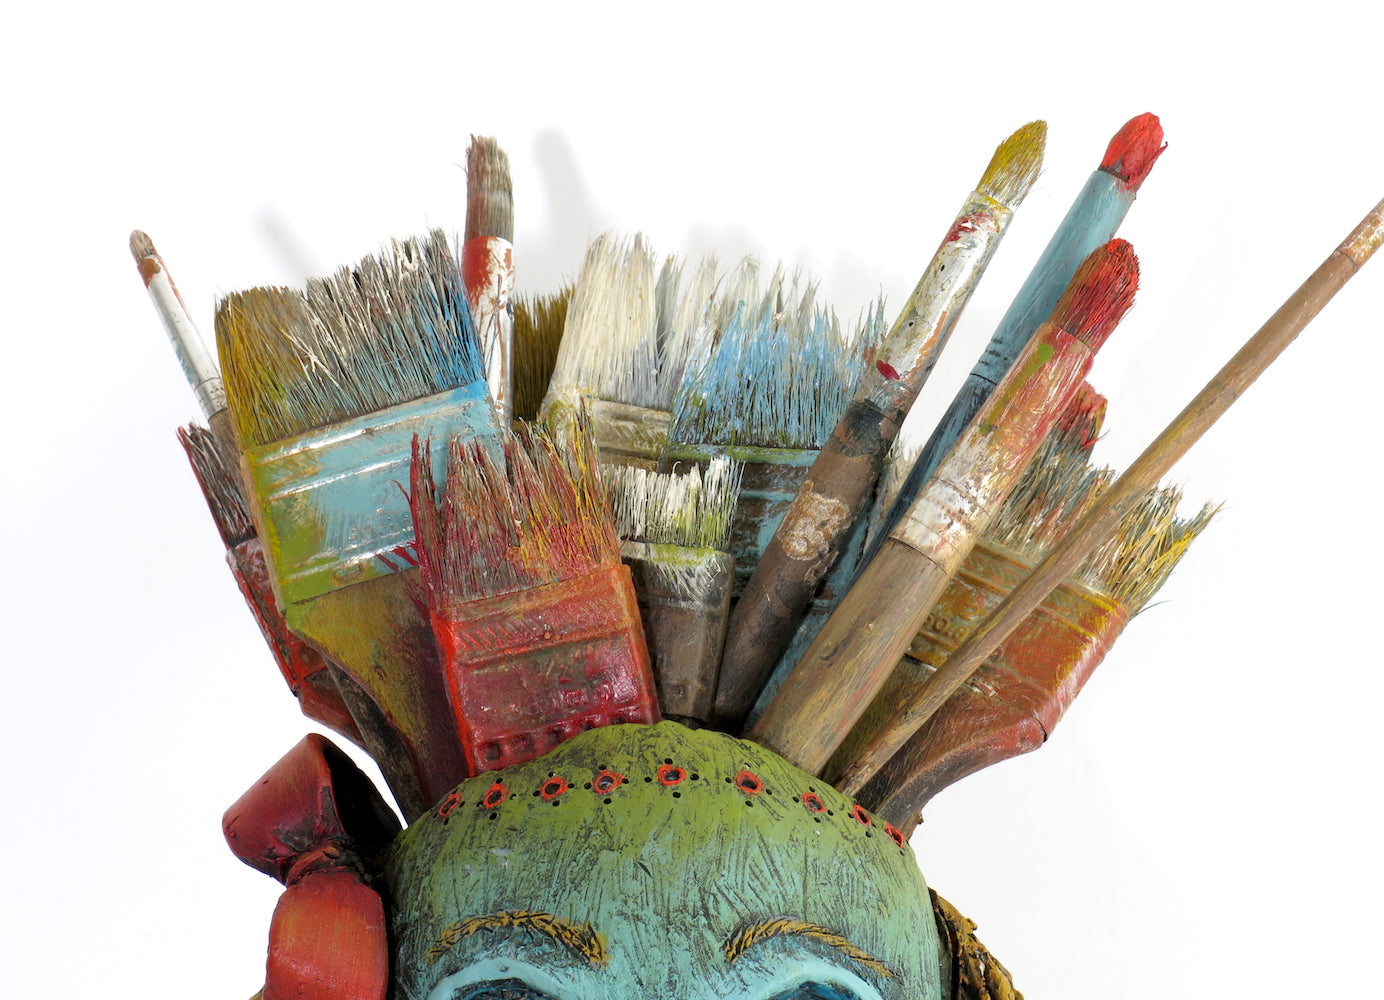 SOLD   "Recounting My Many Brushes With Death" Original ceramic sculpture by Jacquline Hurlbert